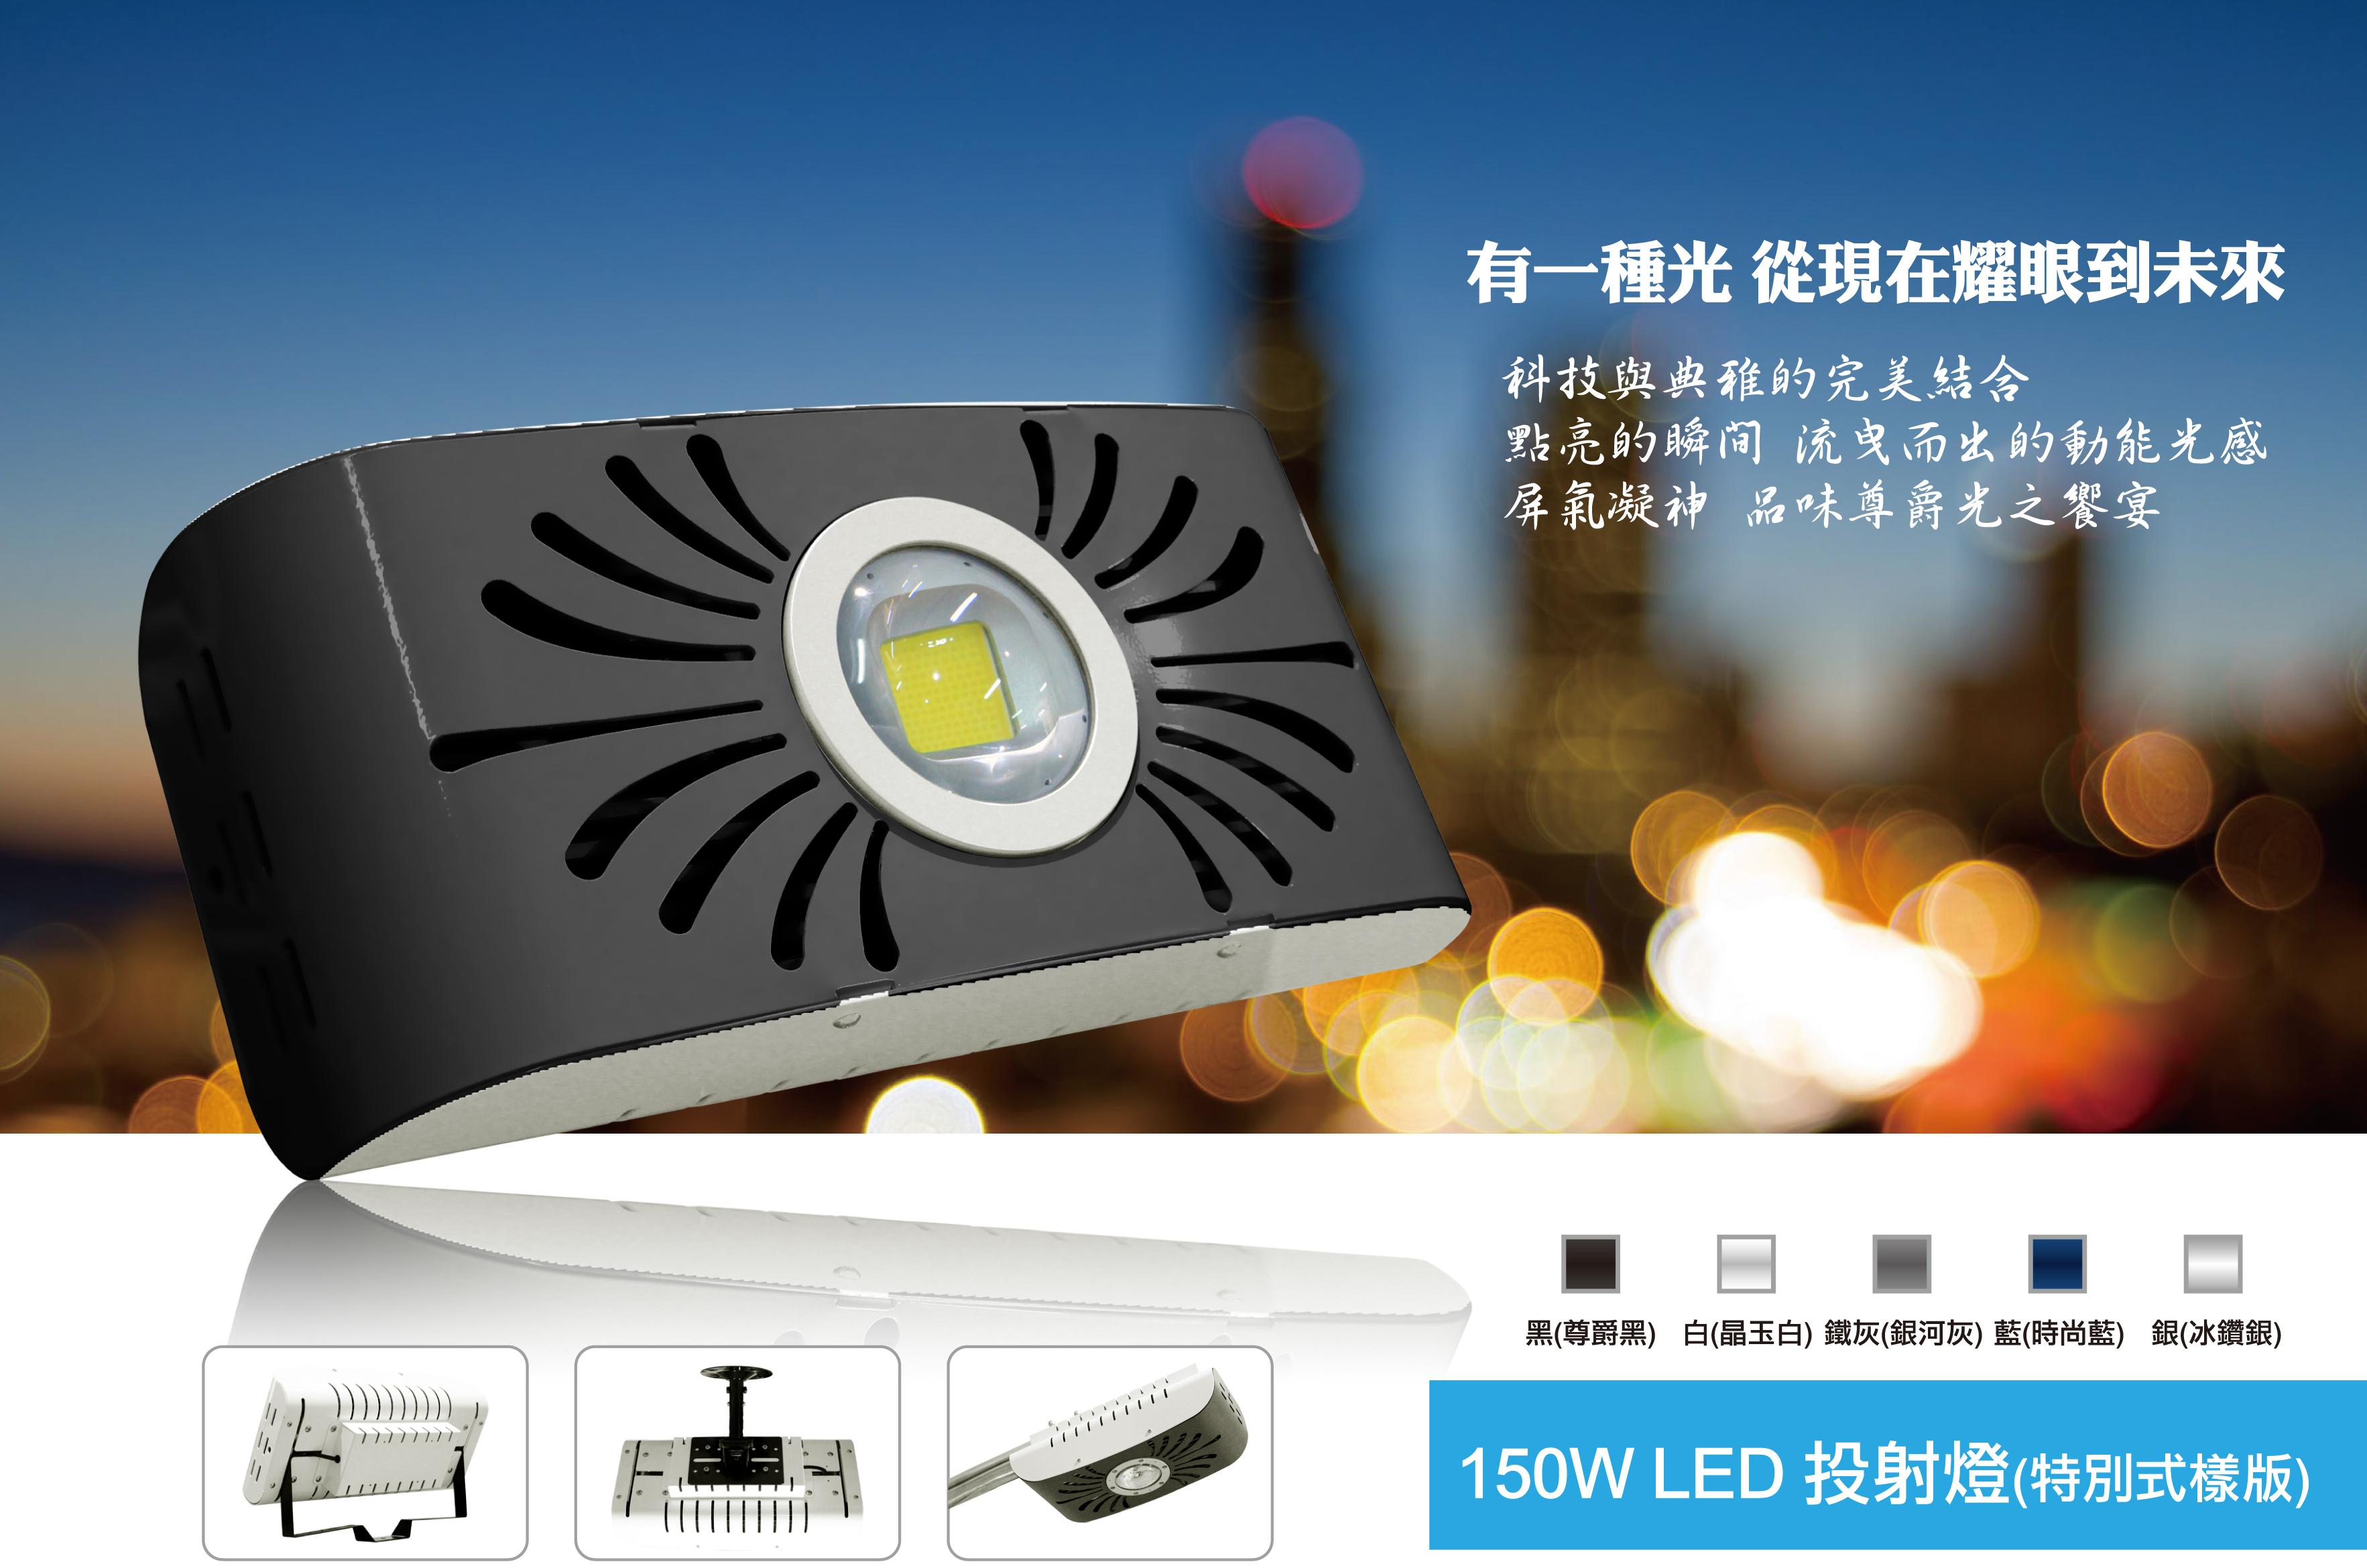 /archive/product/item/images/LED/150W 投射燈-1.jpg